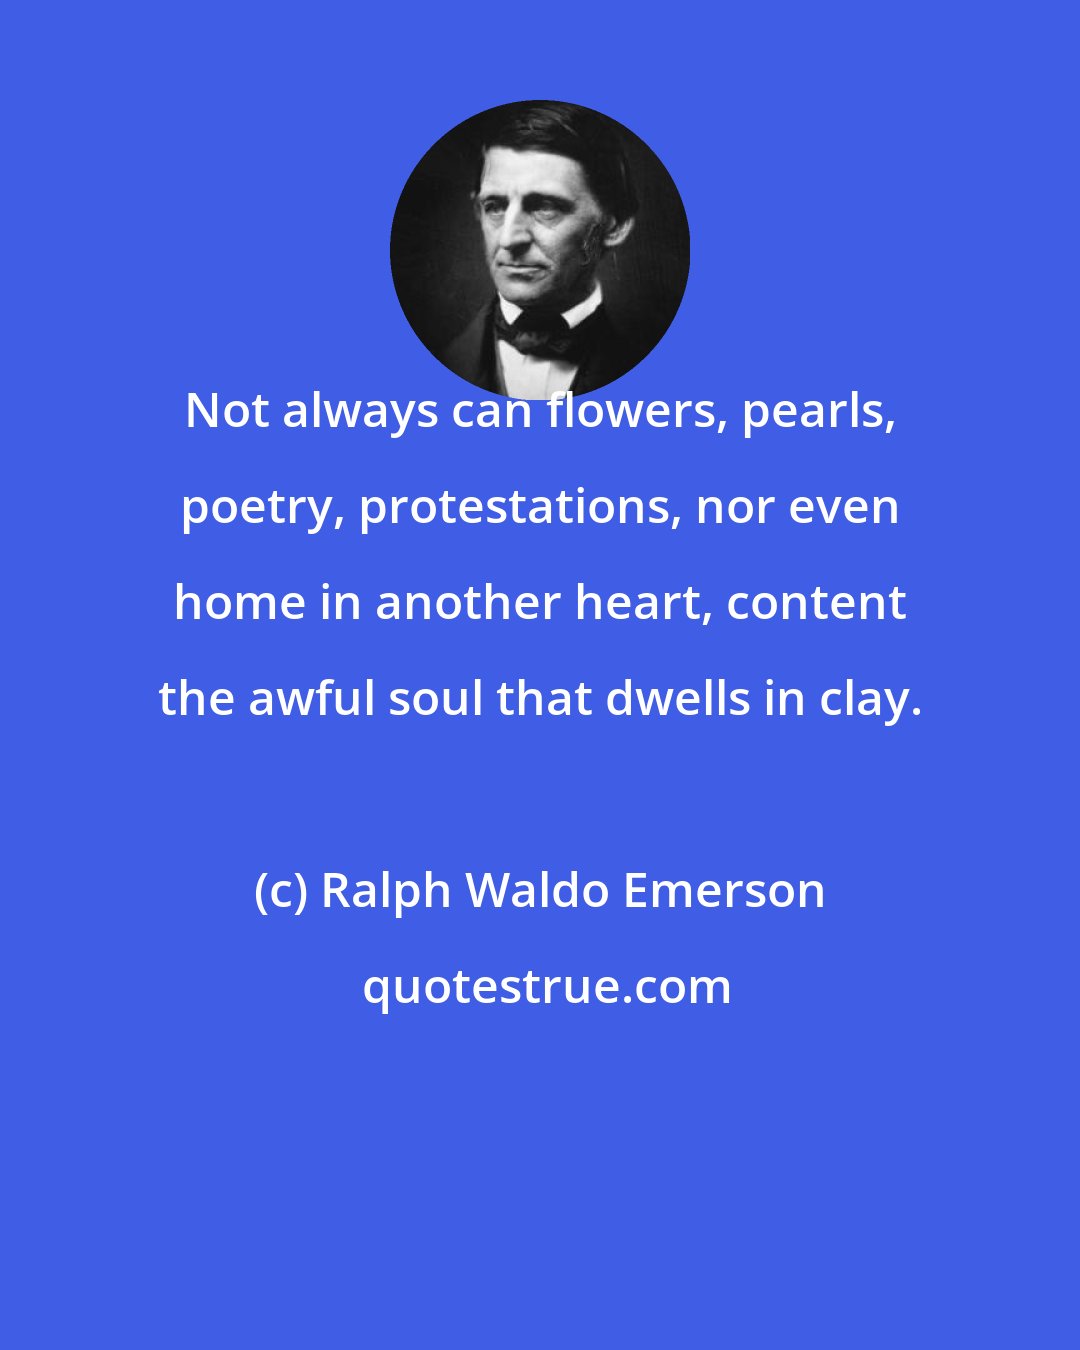 Ralph Waldo Emerson: Not always can flowers, pearls, poetry, protestations, nor even home in another heart, content the awful soul that dwells in clay.